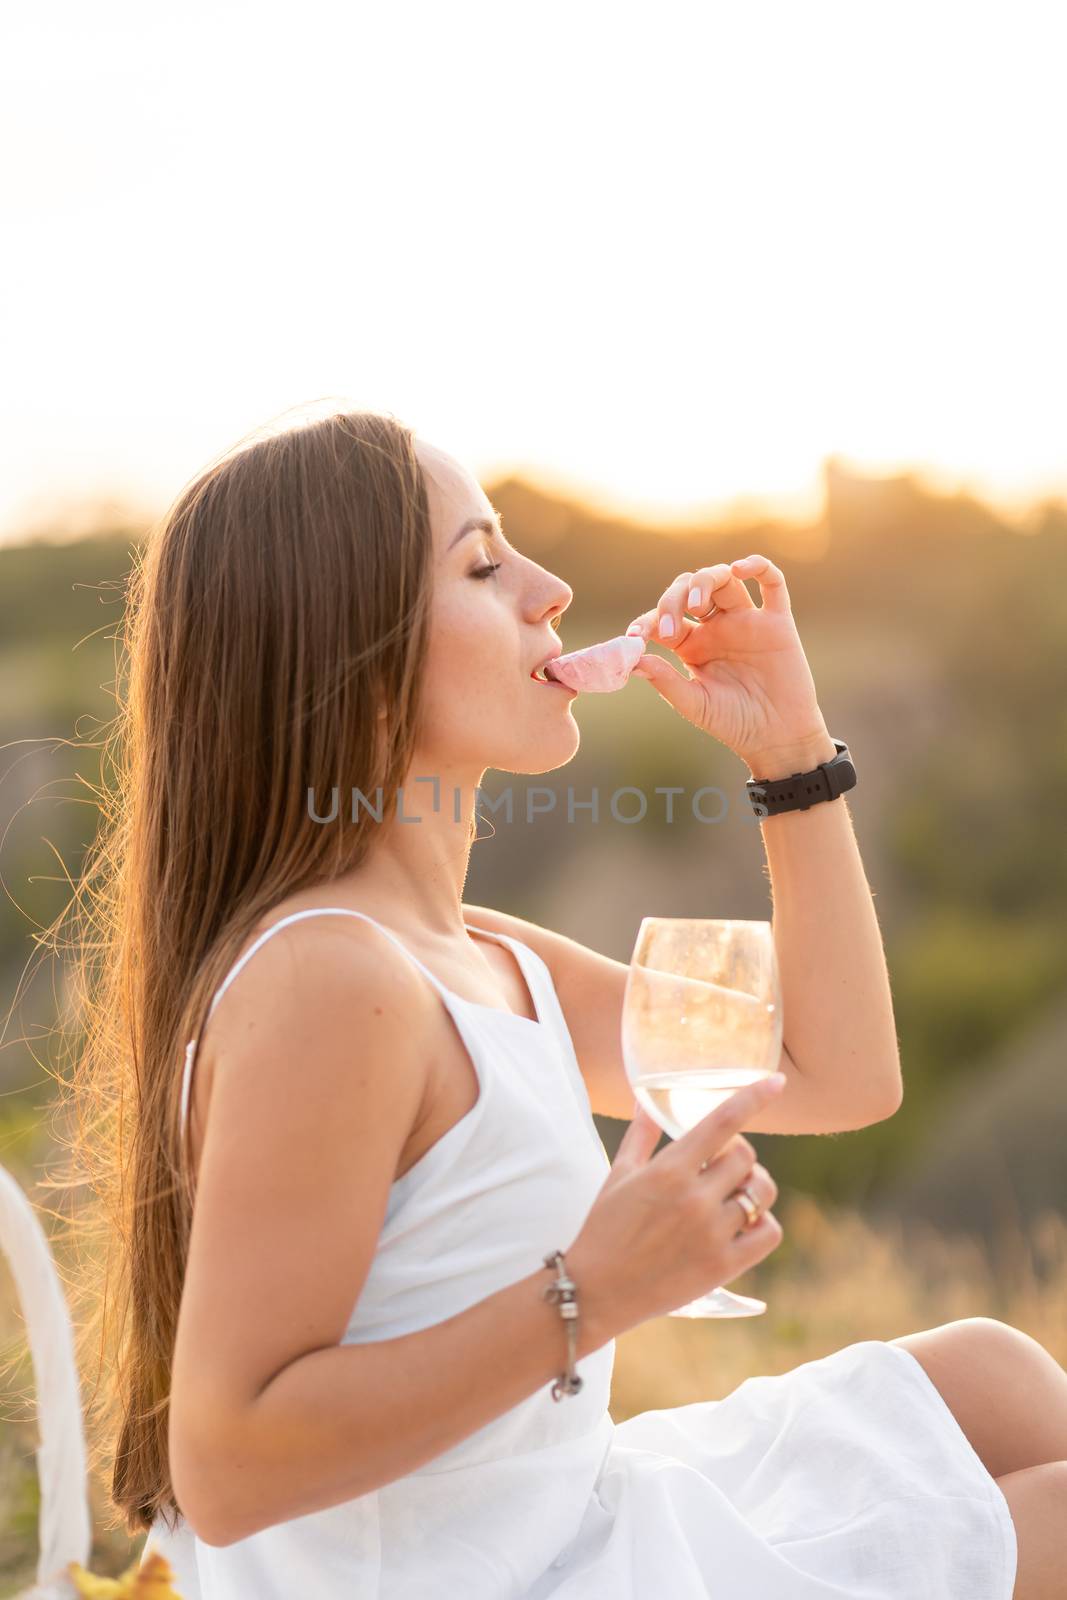 Gorgeous young brunette girl in a white sundress enjoying a picnic in a picturesque place. Romantic picnic.